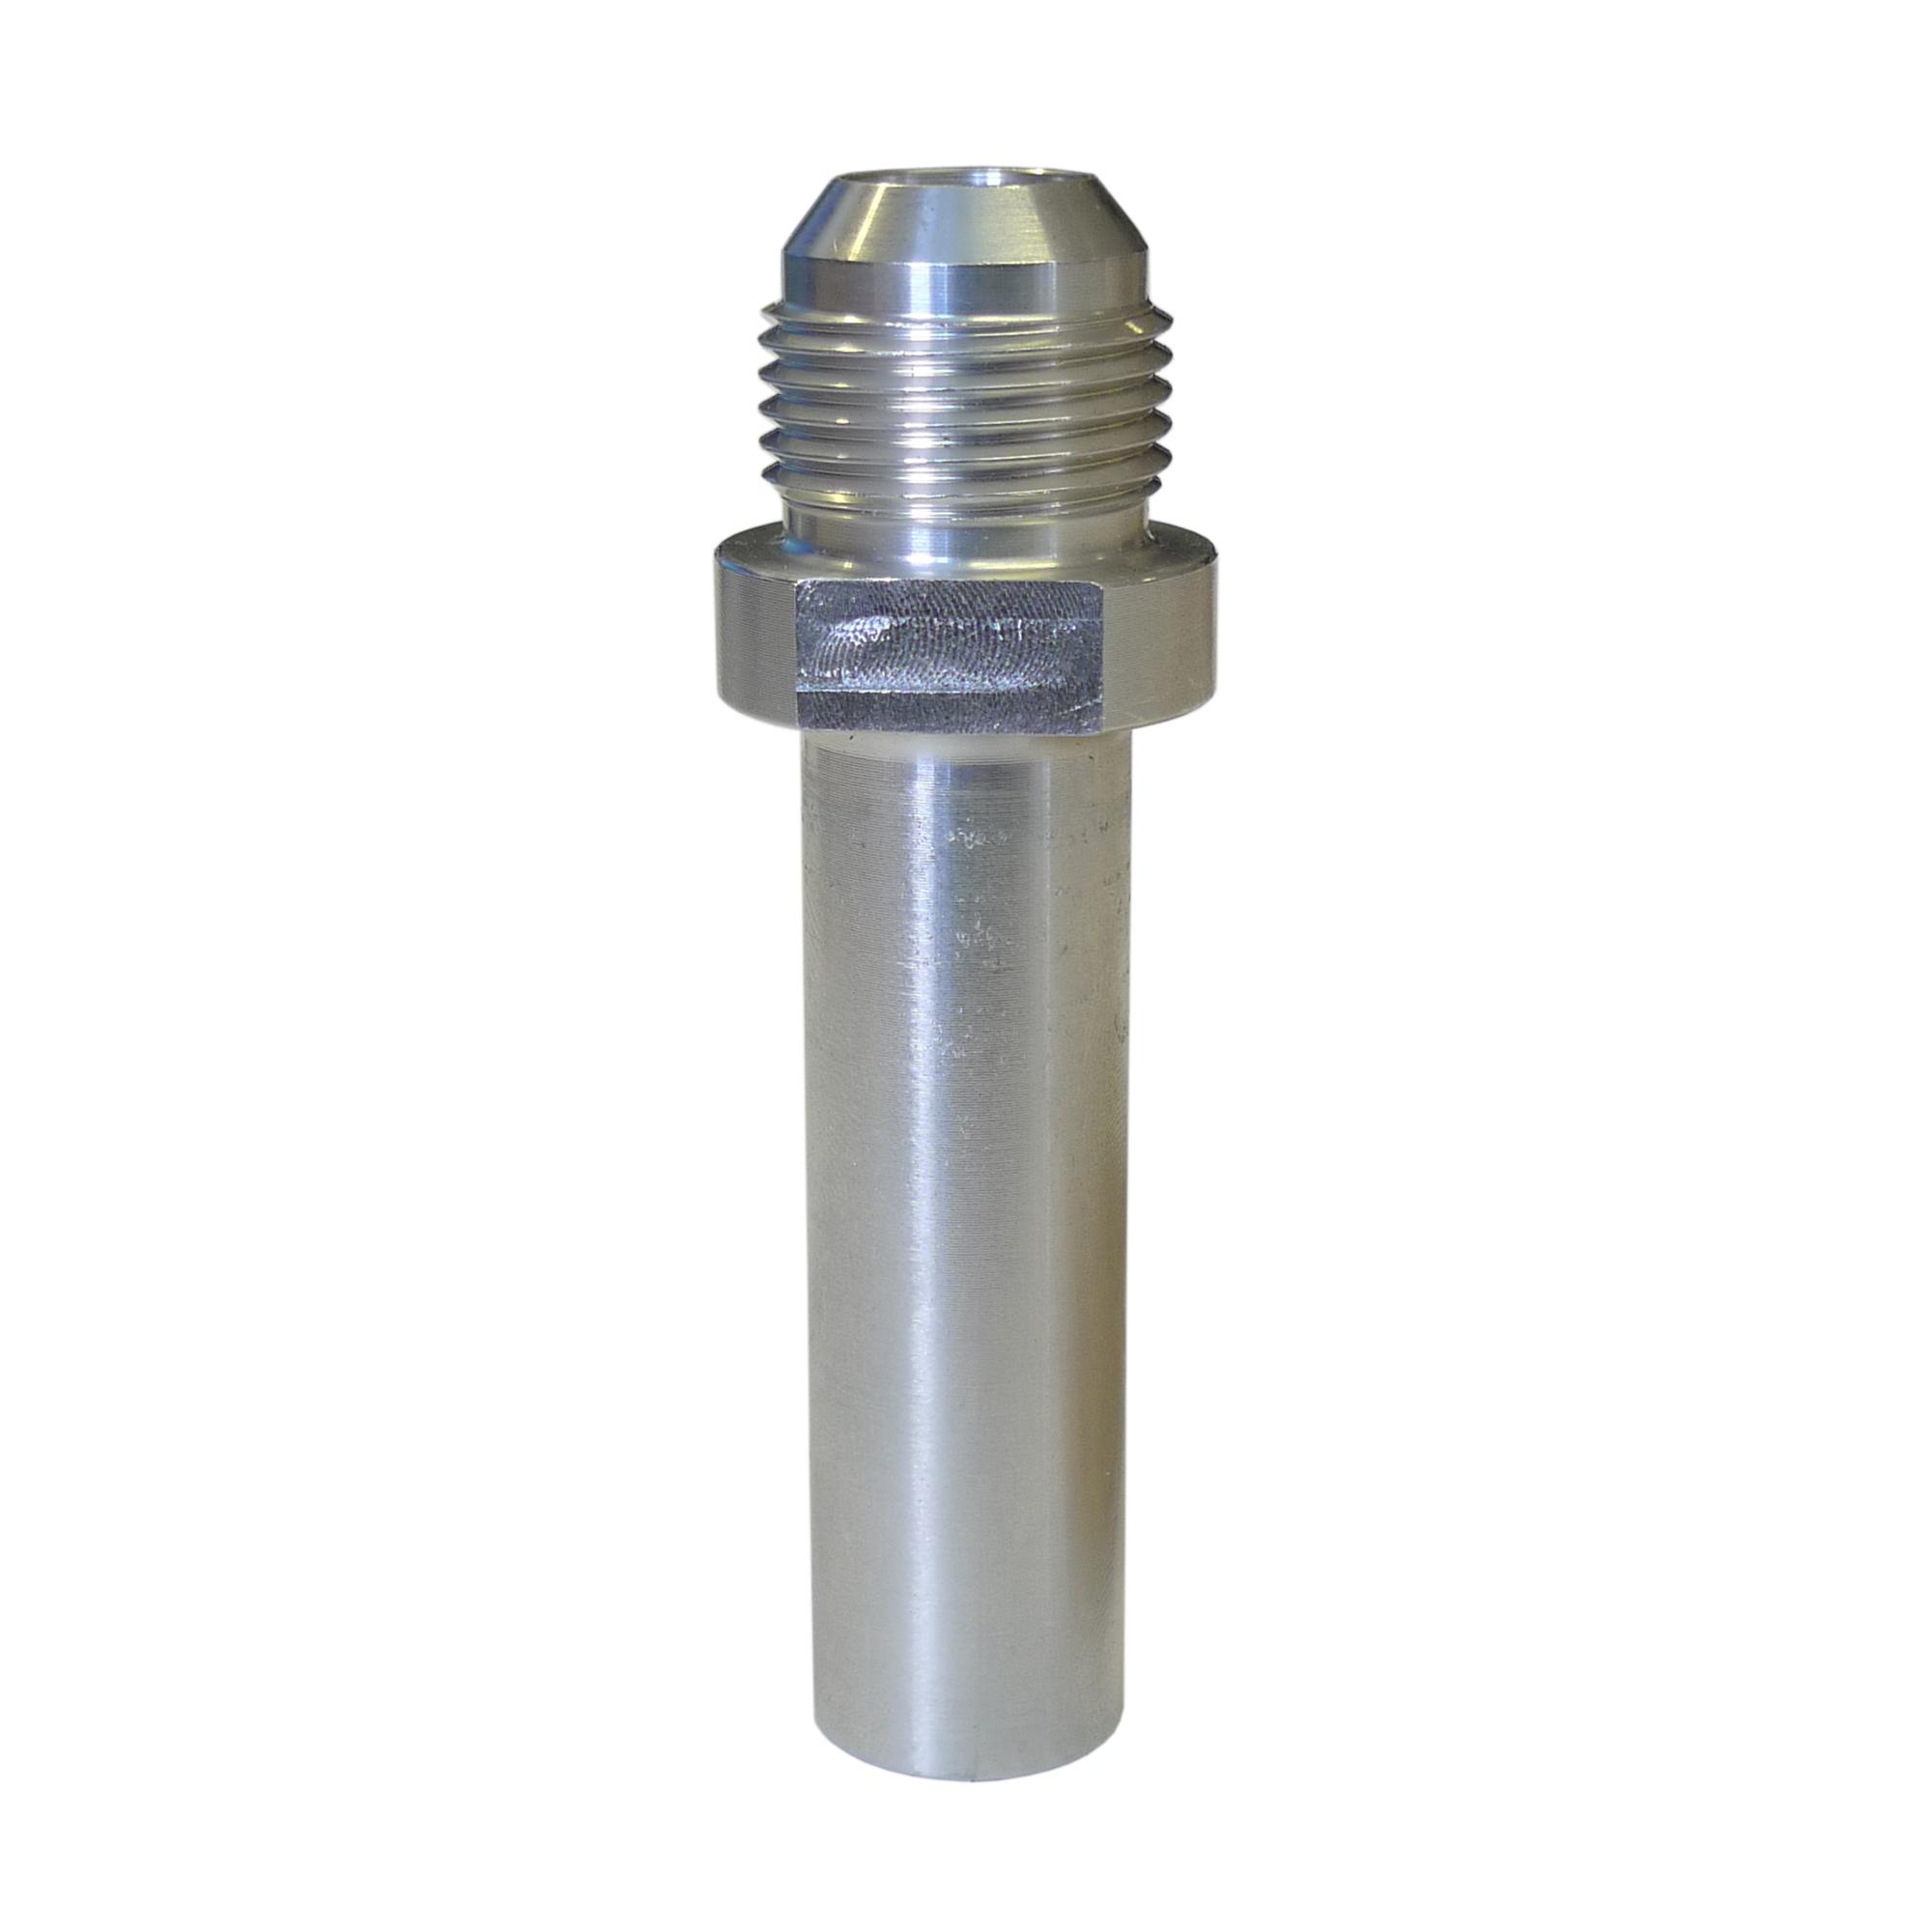 Weld On Alloy -12 JIC Male Fitting With Extended Stem